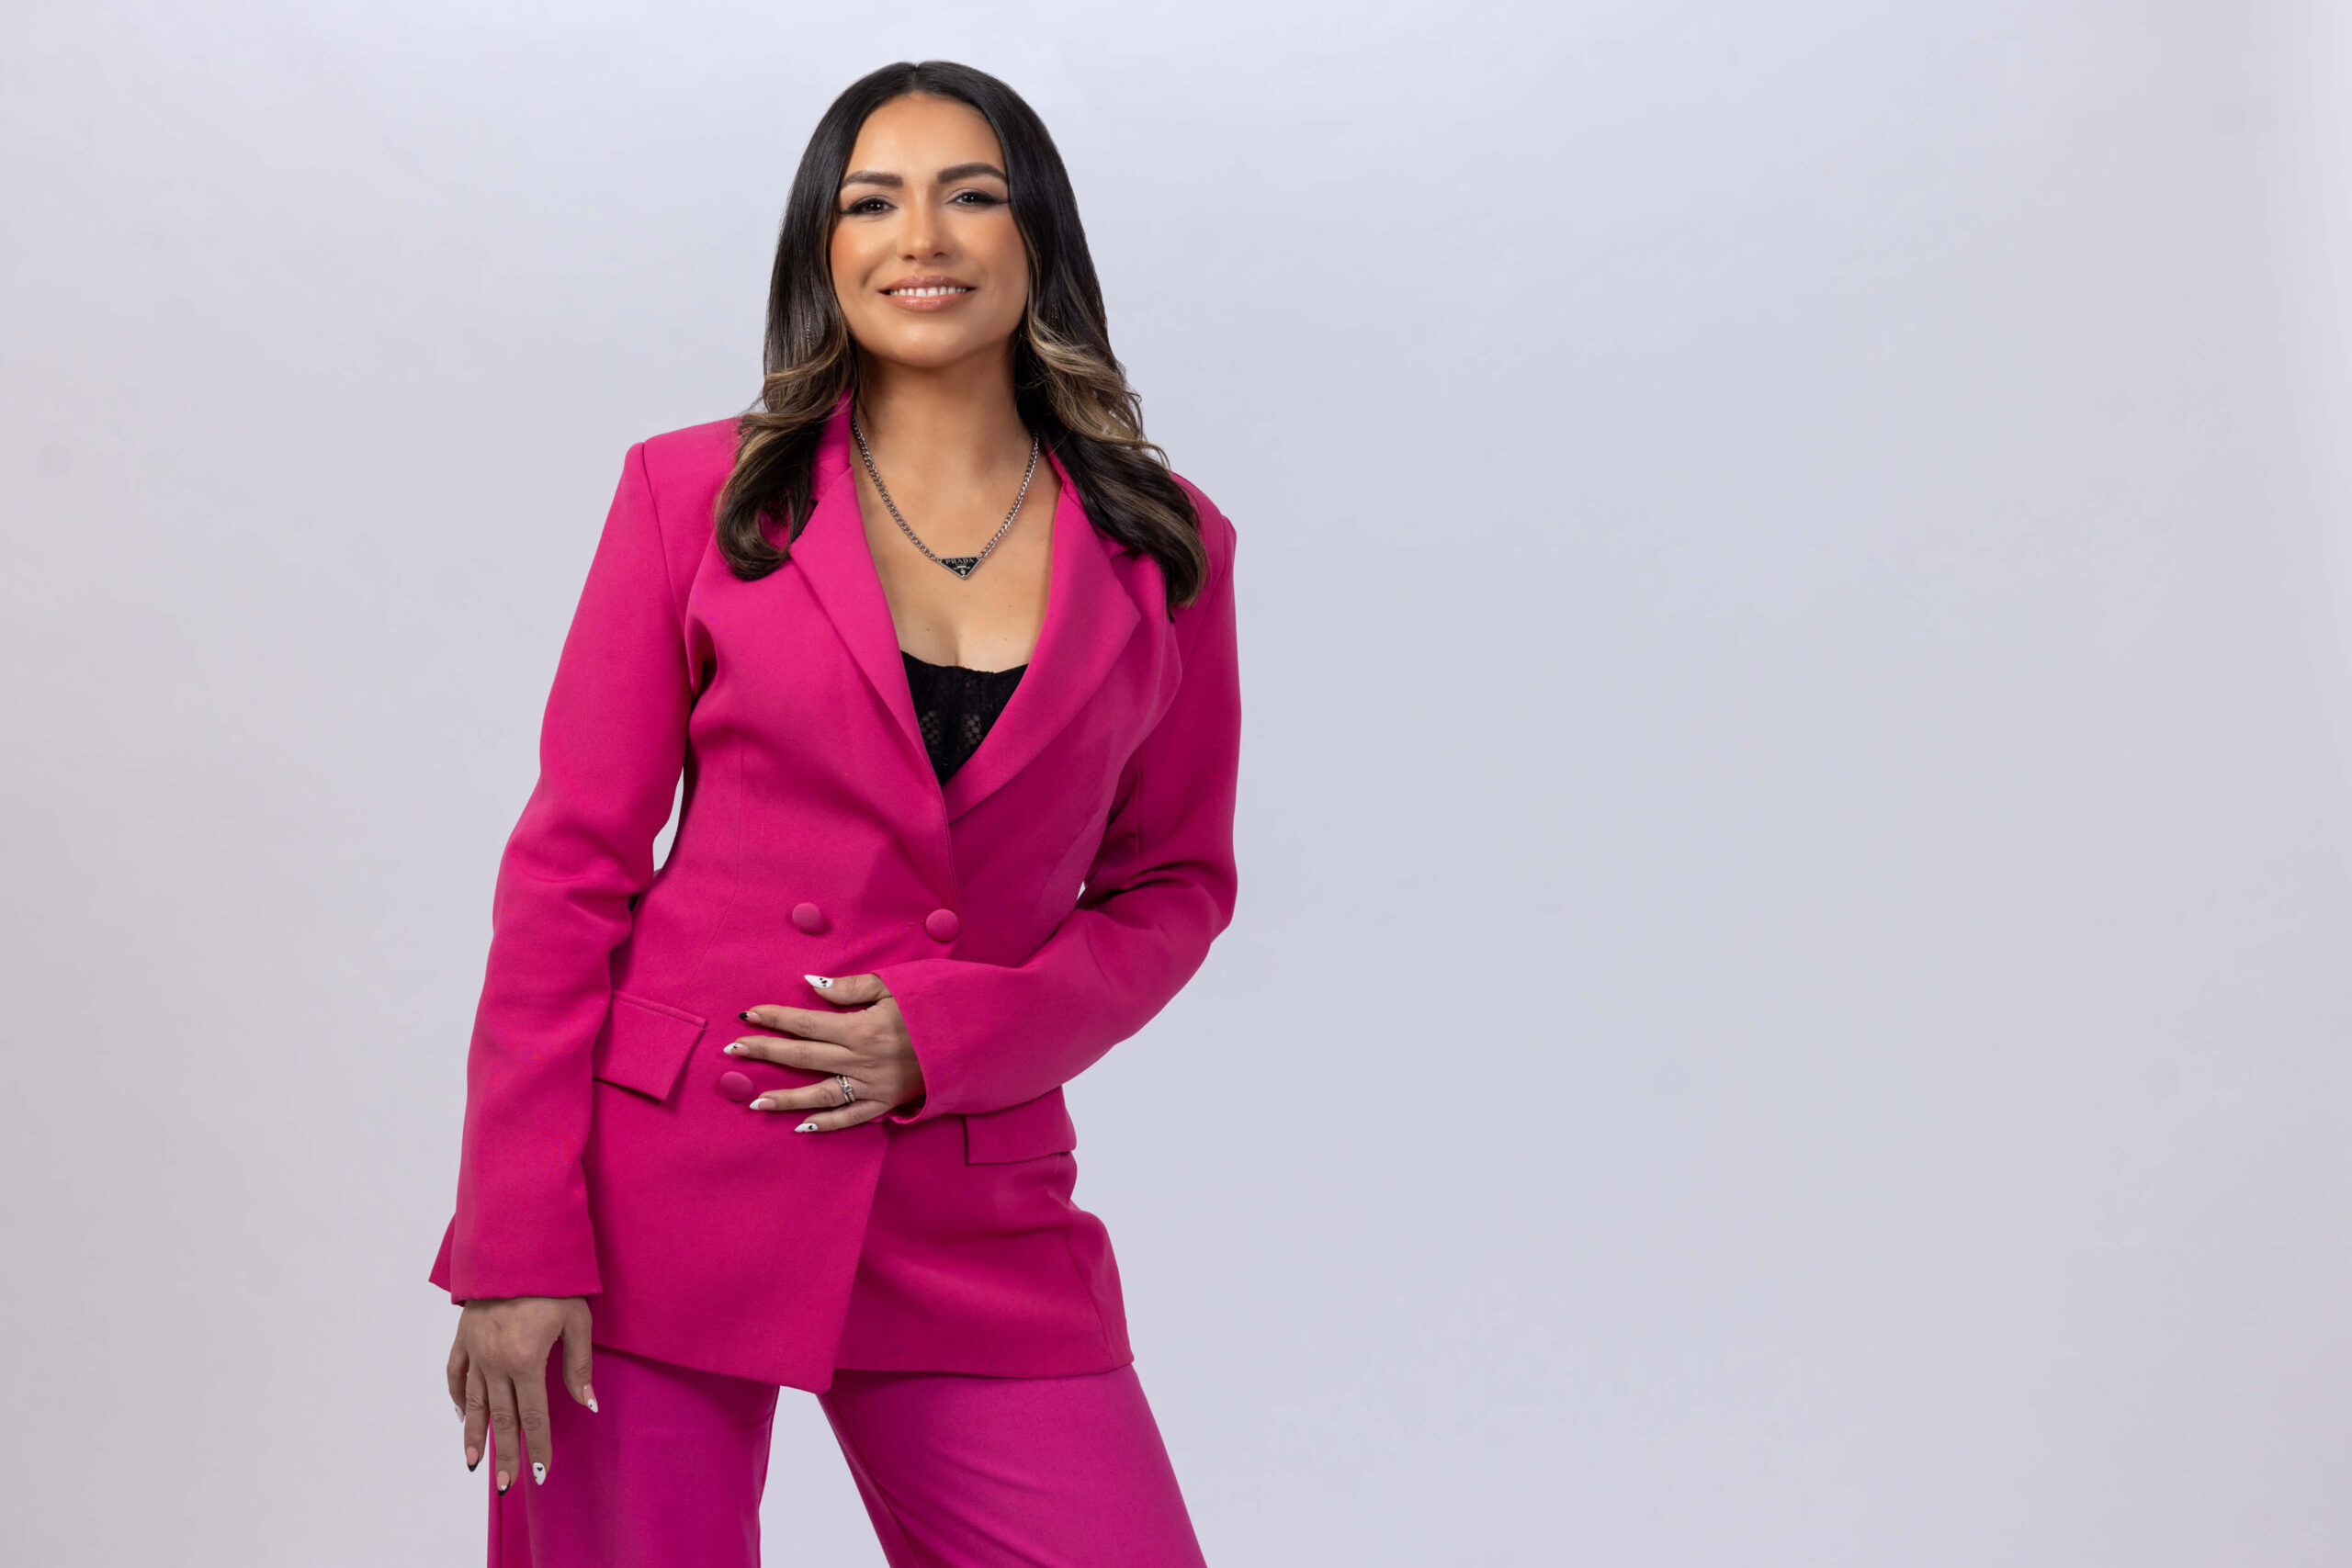 women in hot pink suit posing against a white background